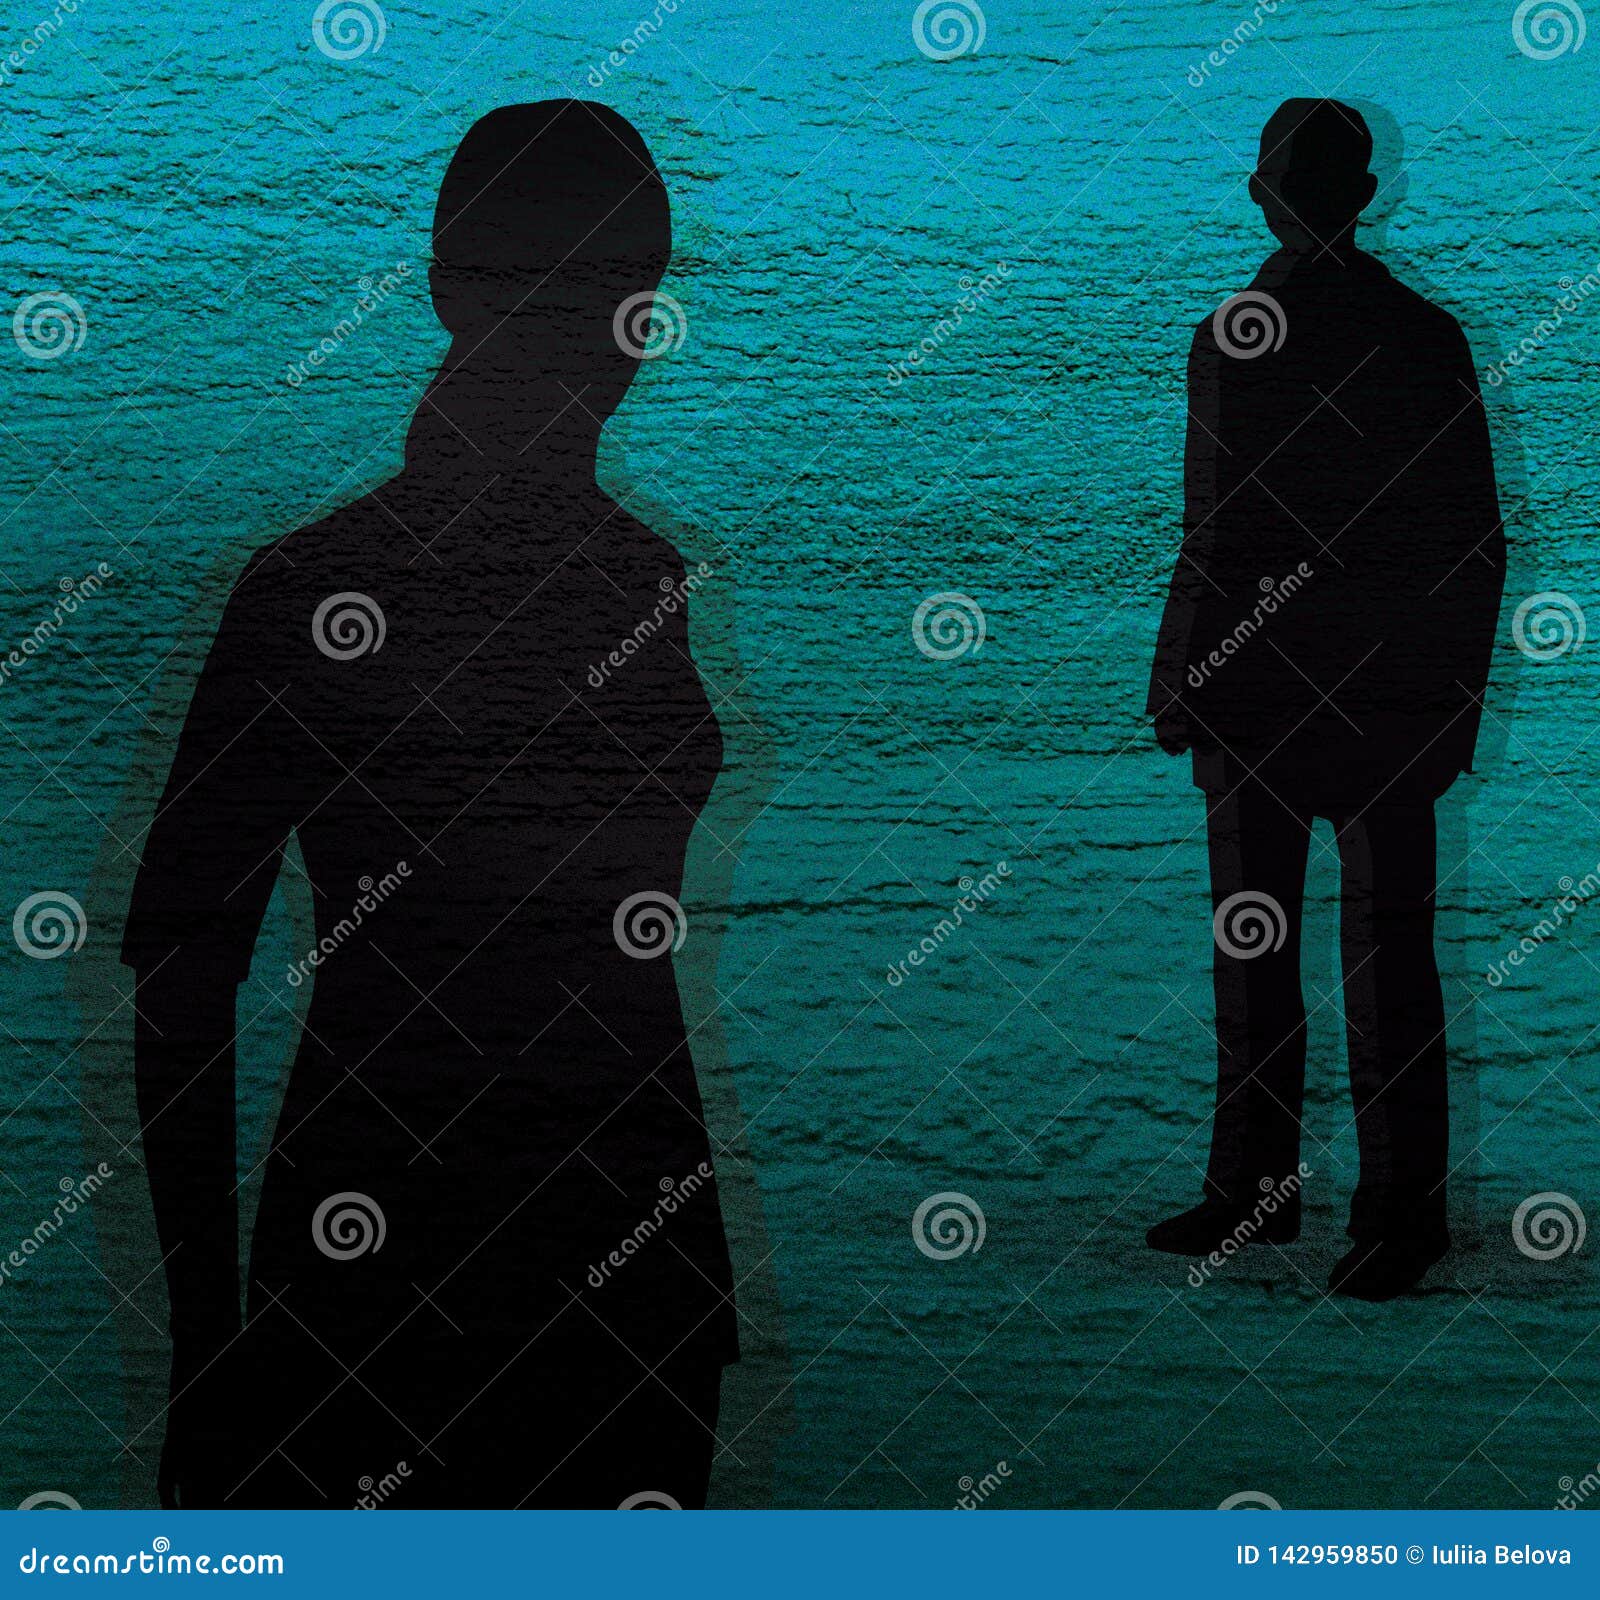 Silhouette of a Girl and a Young Man on a Blue and Green Textured ...